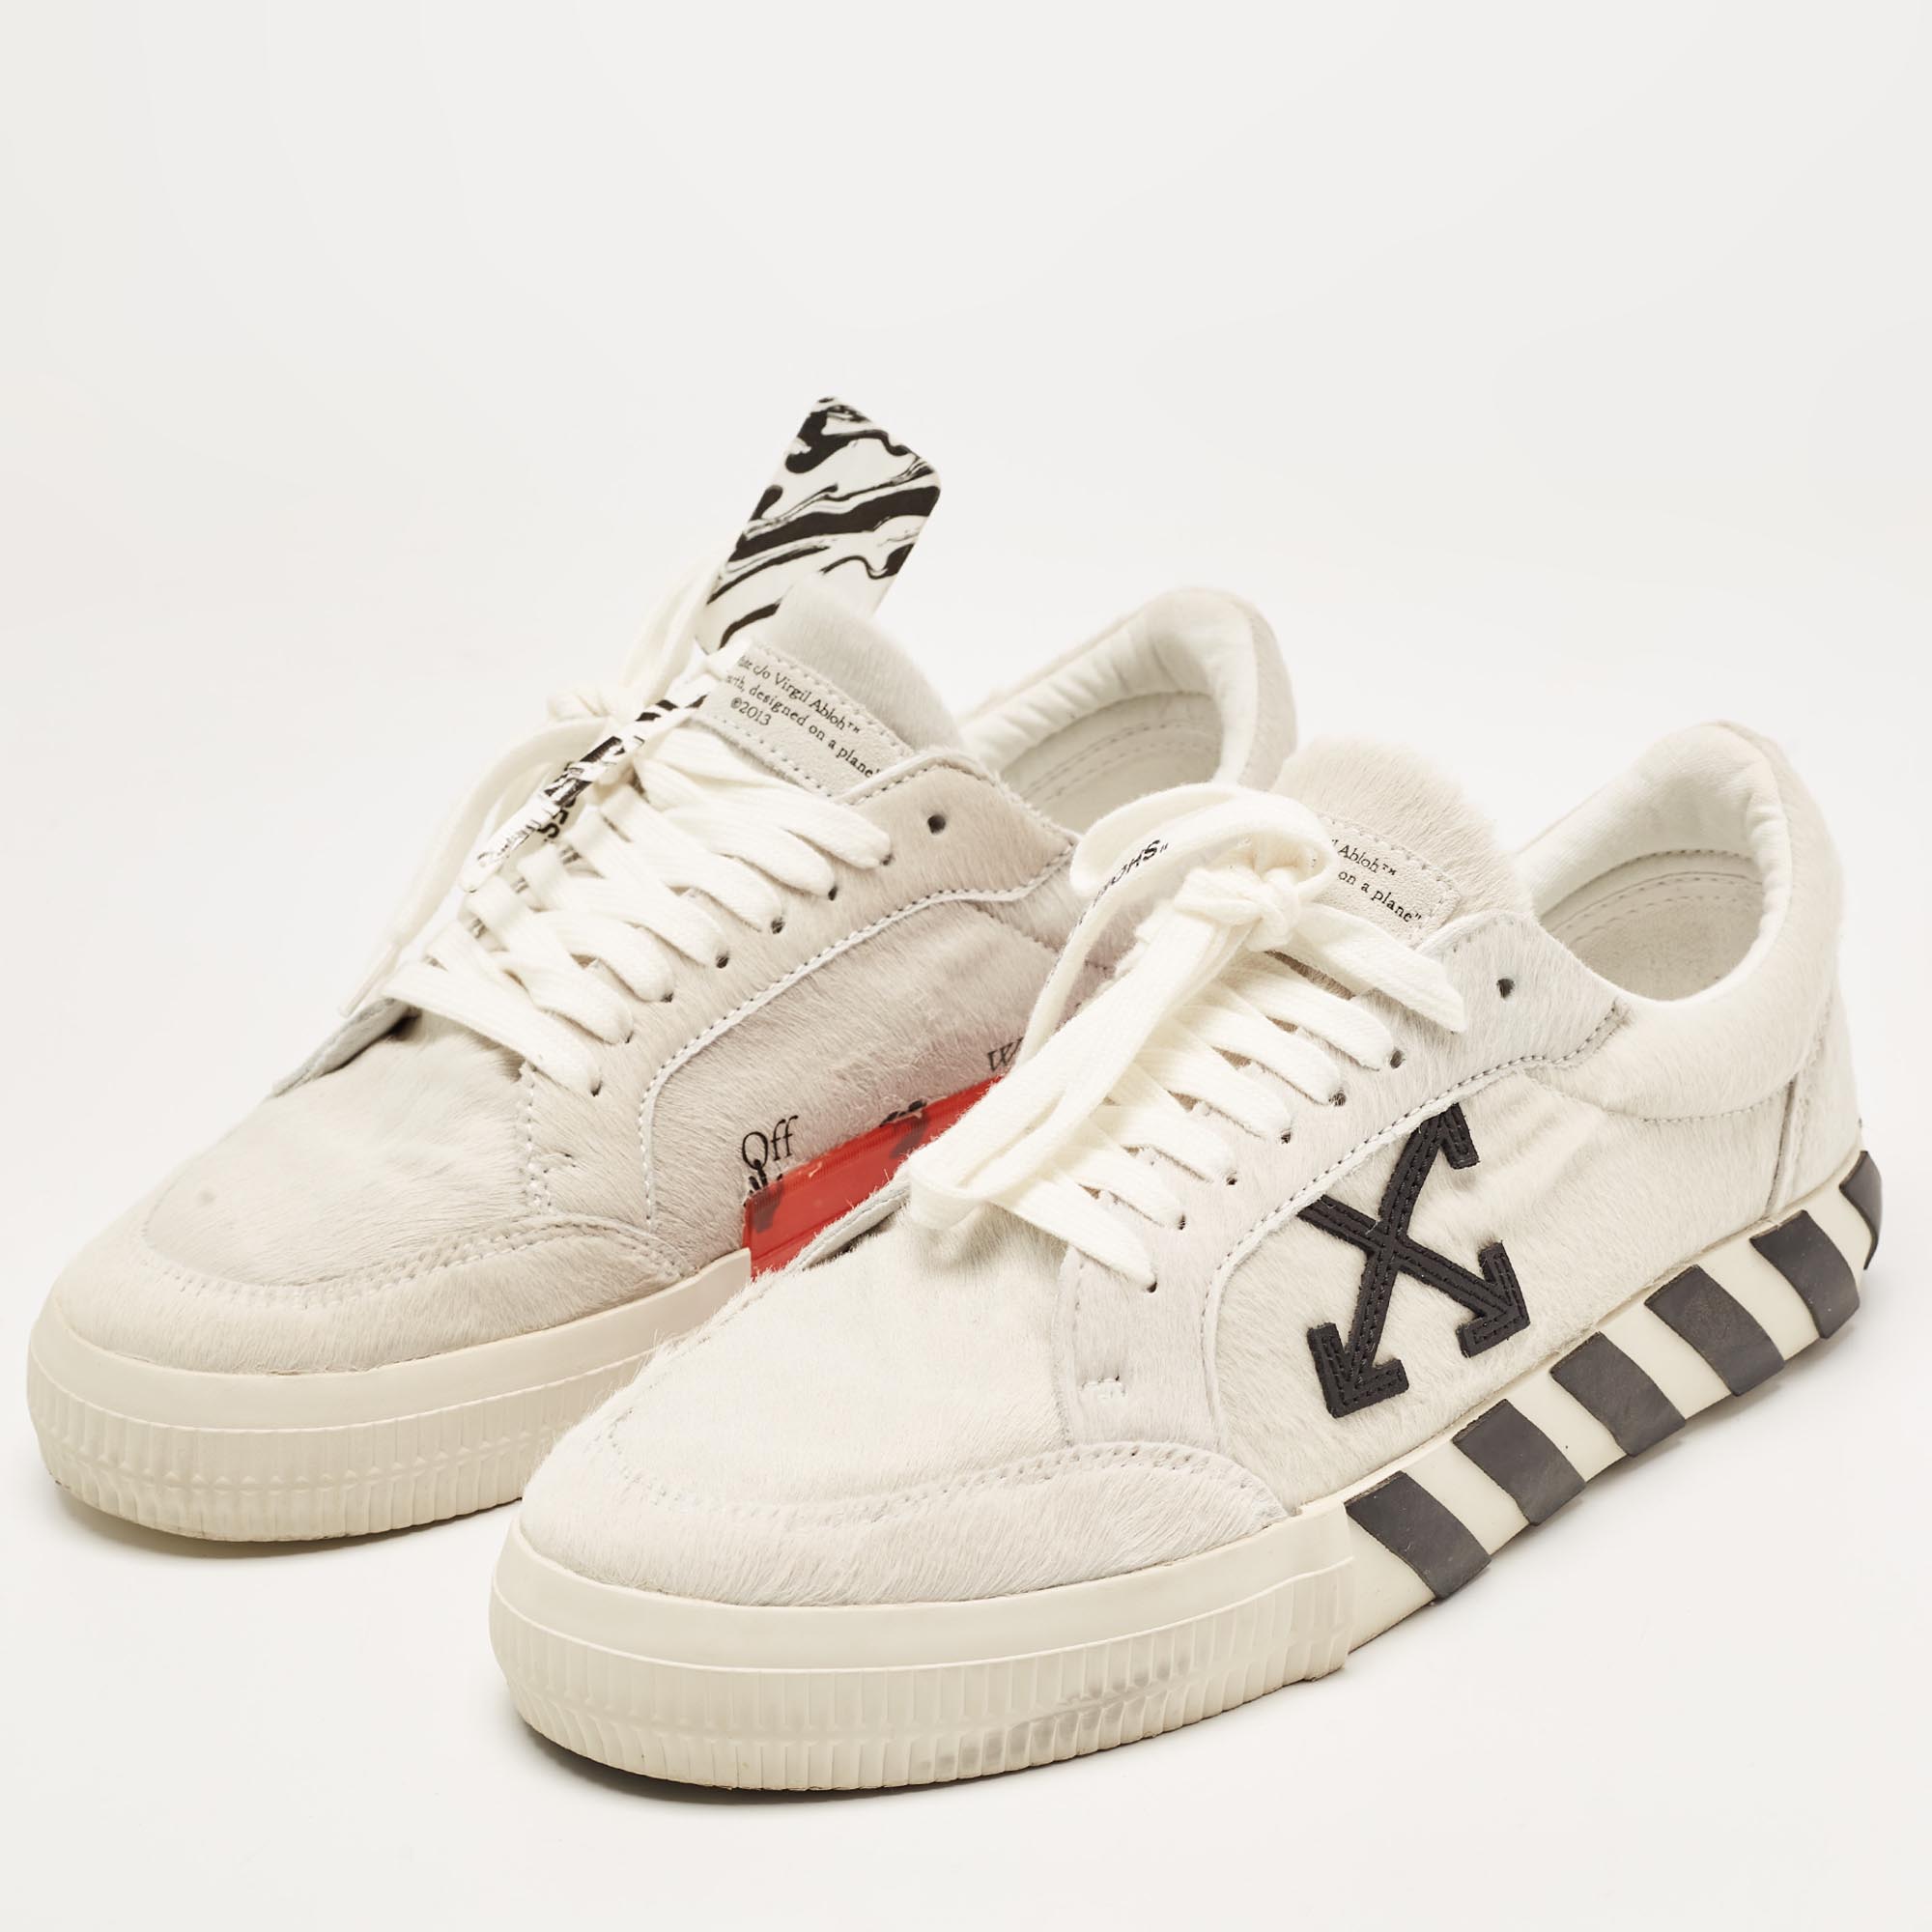 

Off-White White/Black Calf Hair Vulcanized Low Sneakers Size